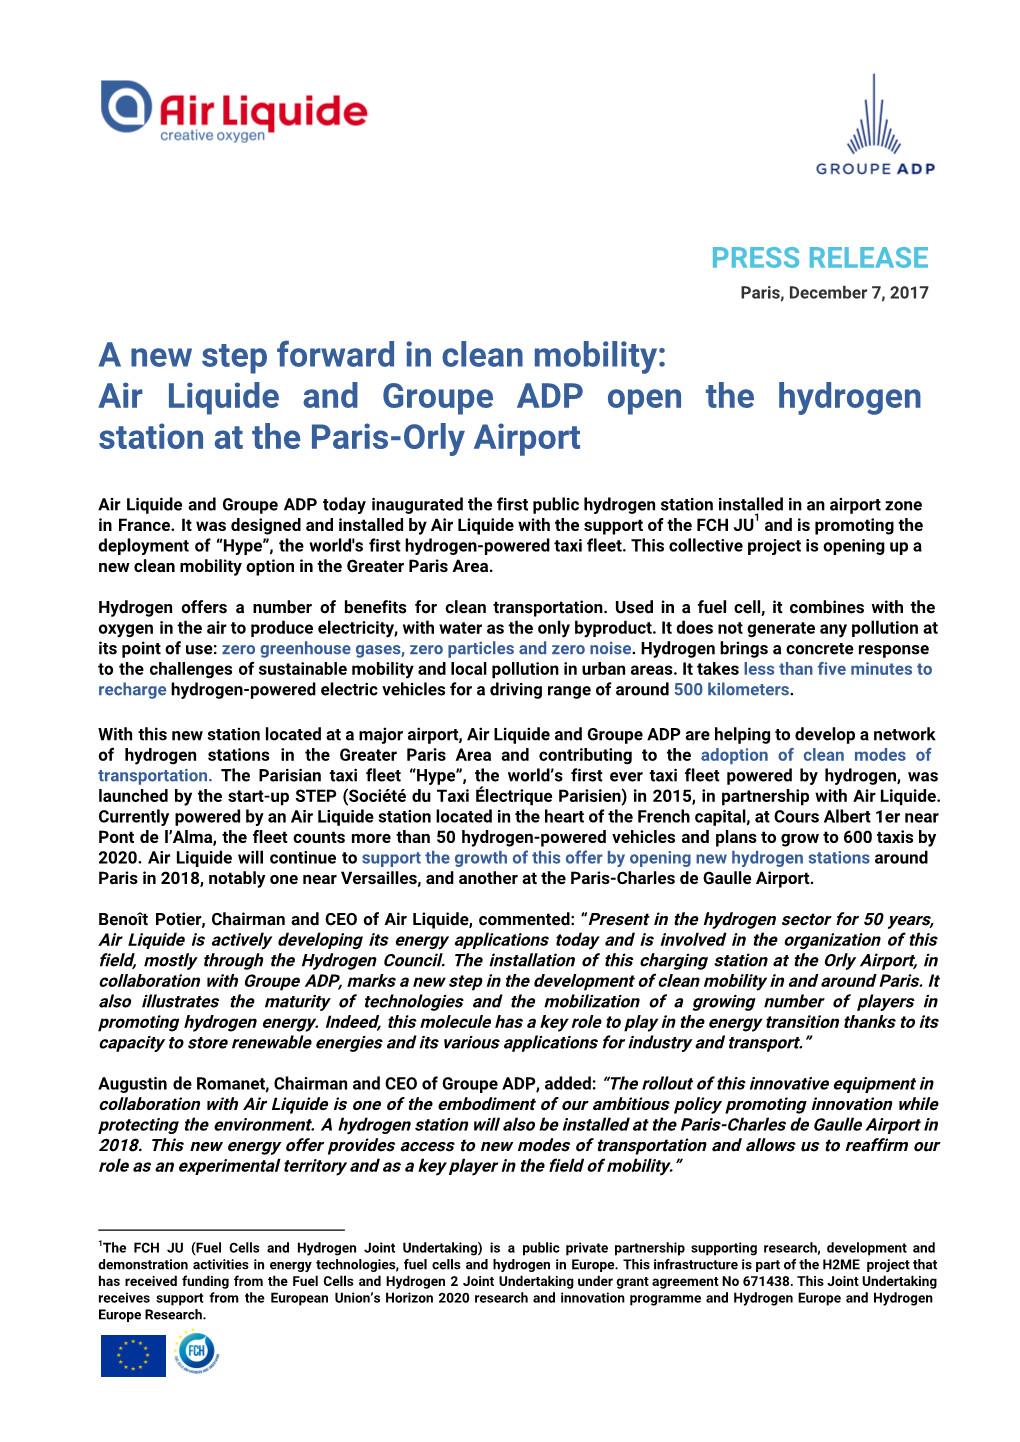 Air Liquide and Groupe ADP Open the Hydrogen Station​ ​At​ ​The​ ​Paris-Orly​ ​Airport